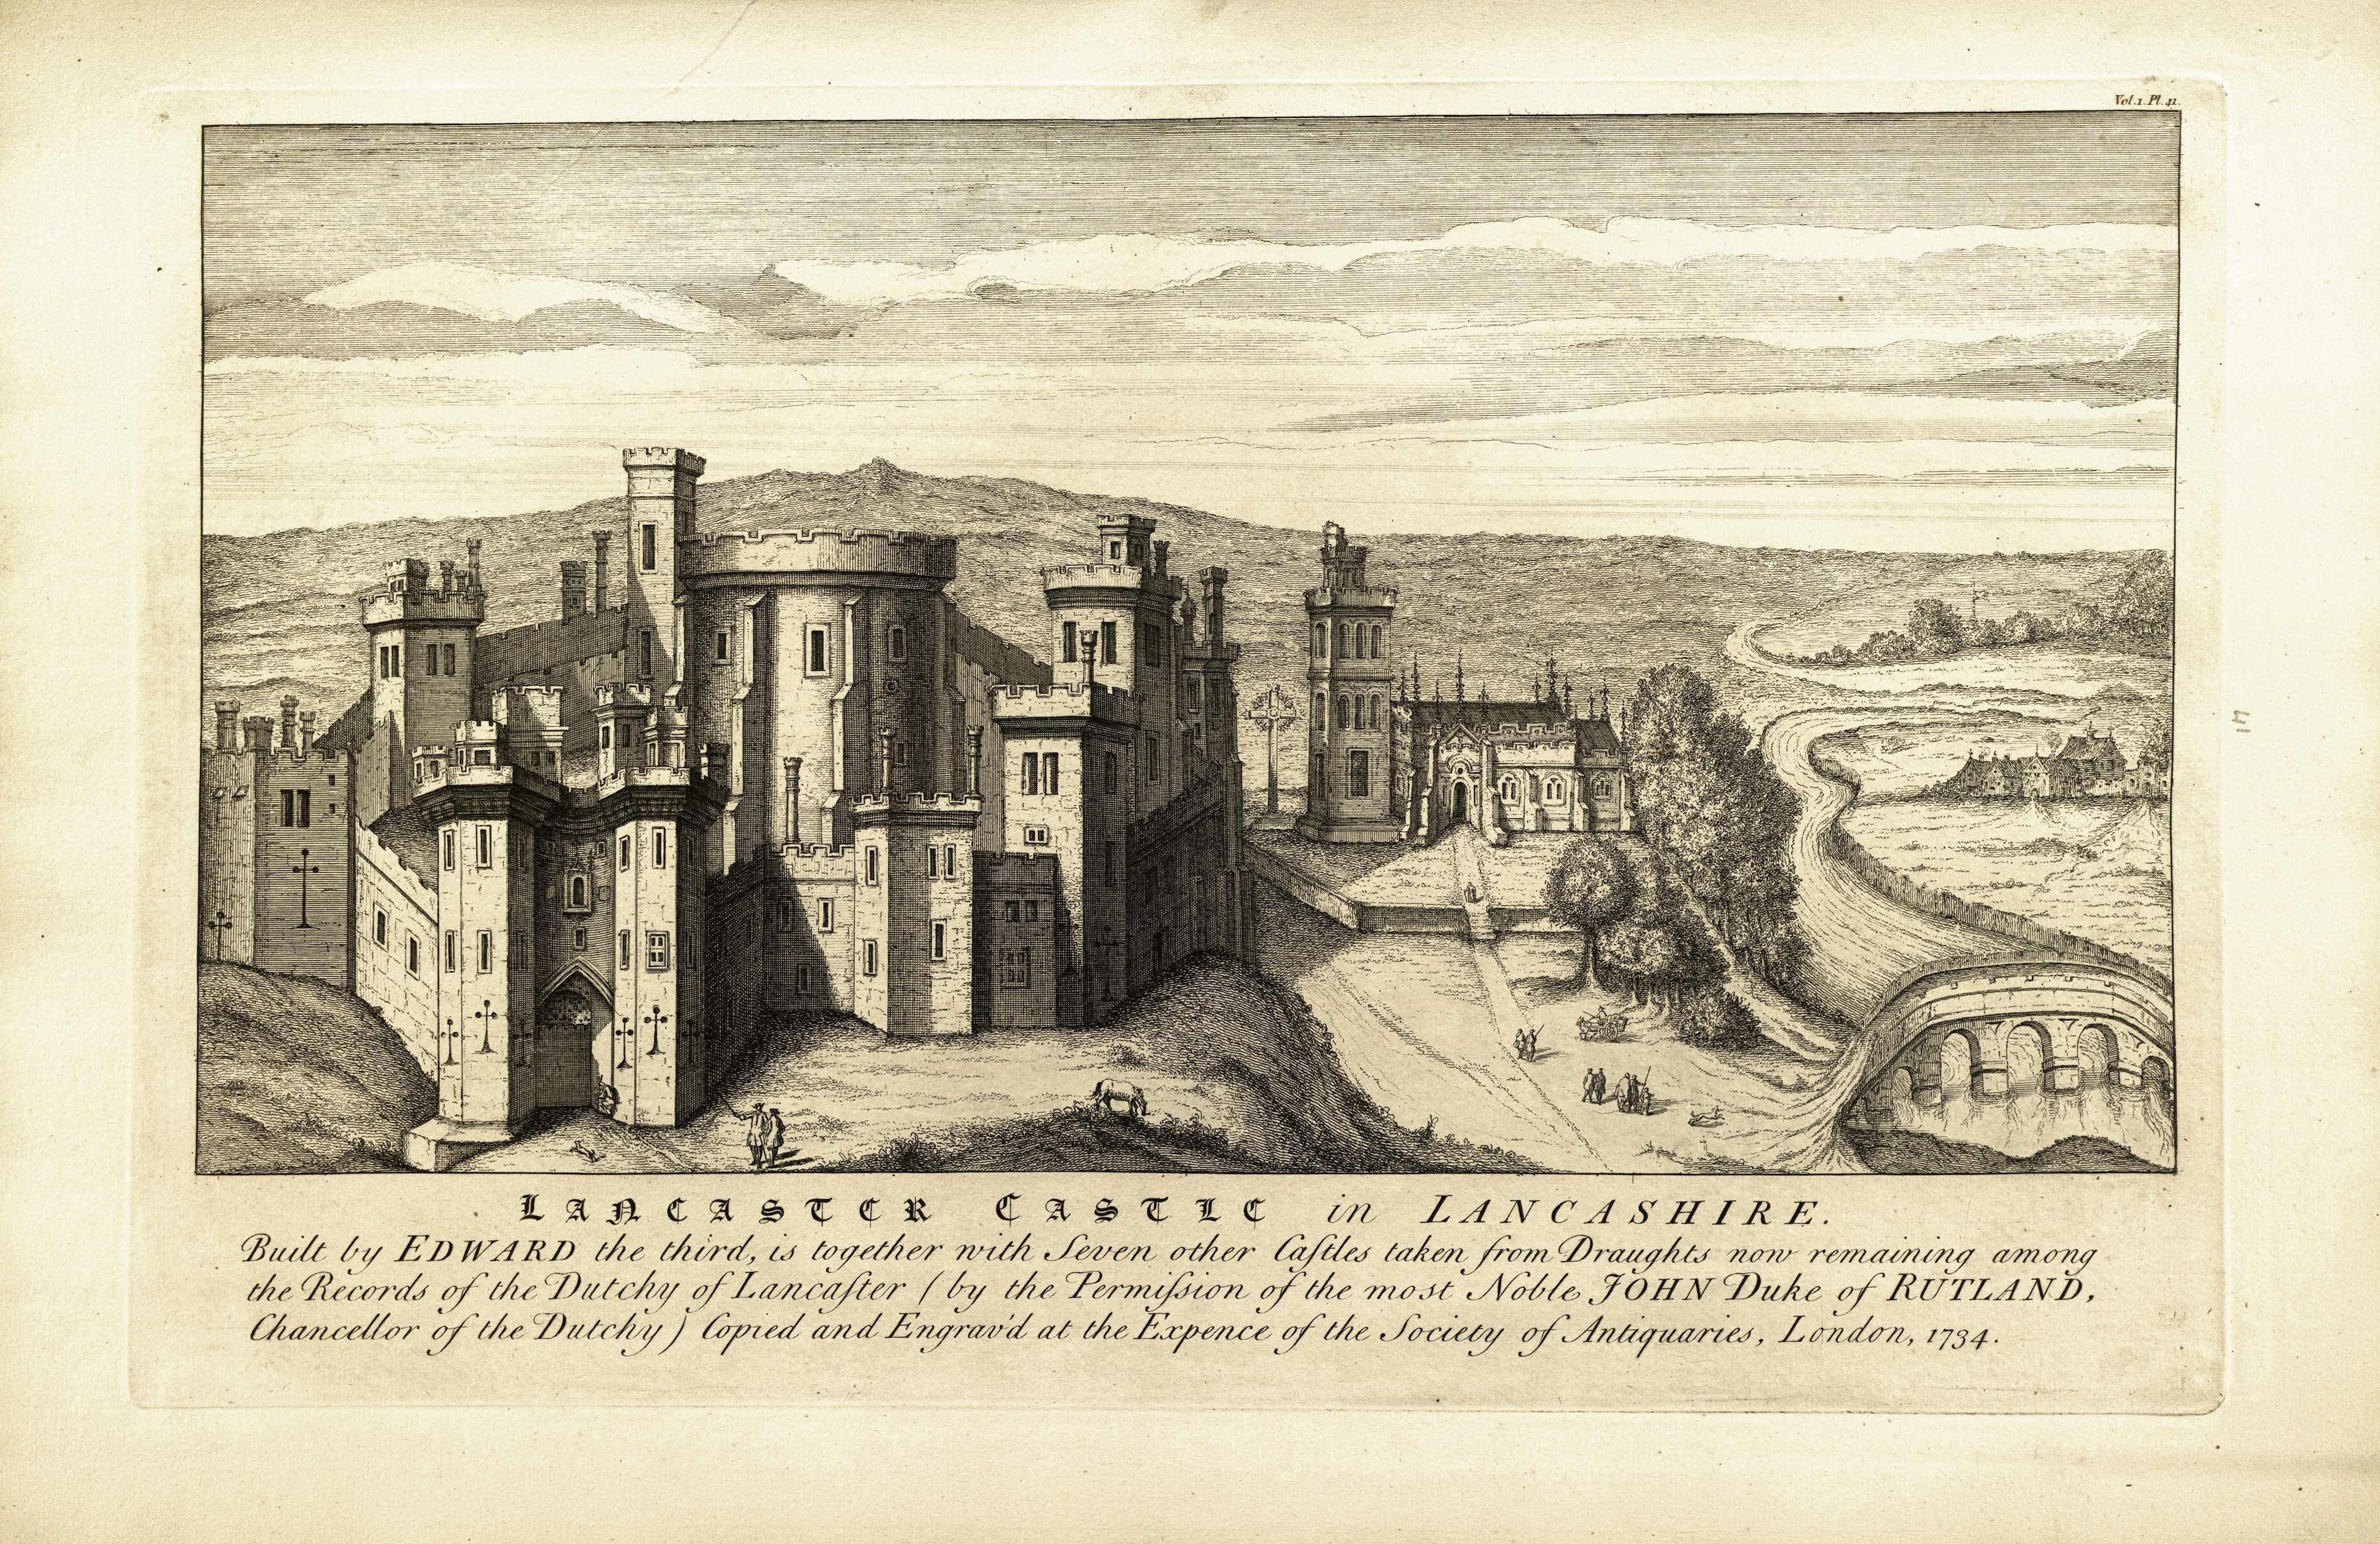 The castle of Tancarville. circa 1840 (Engraving)